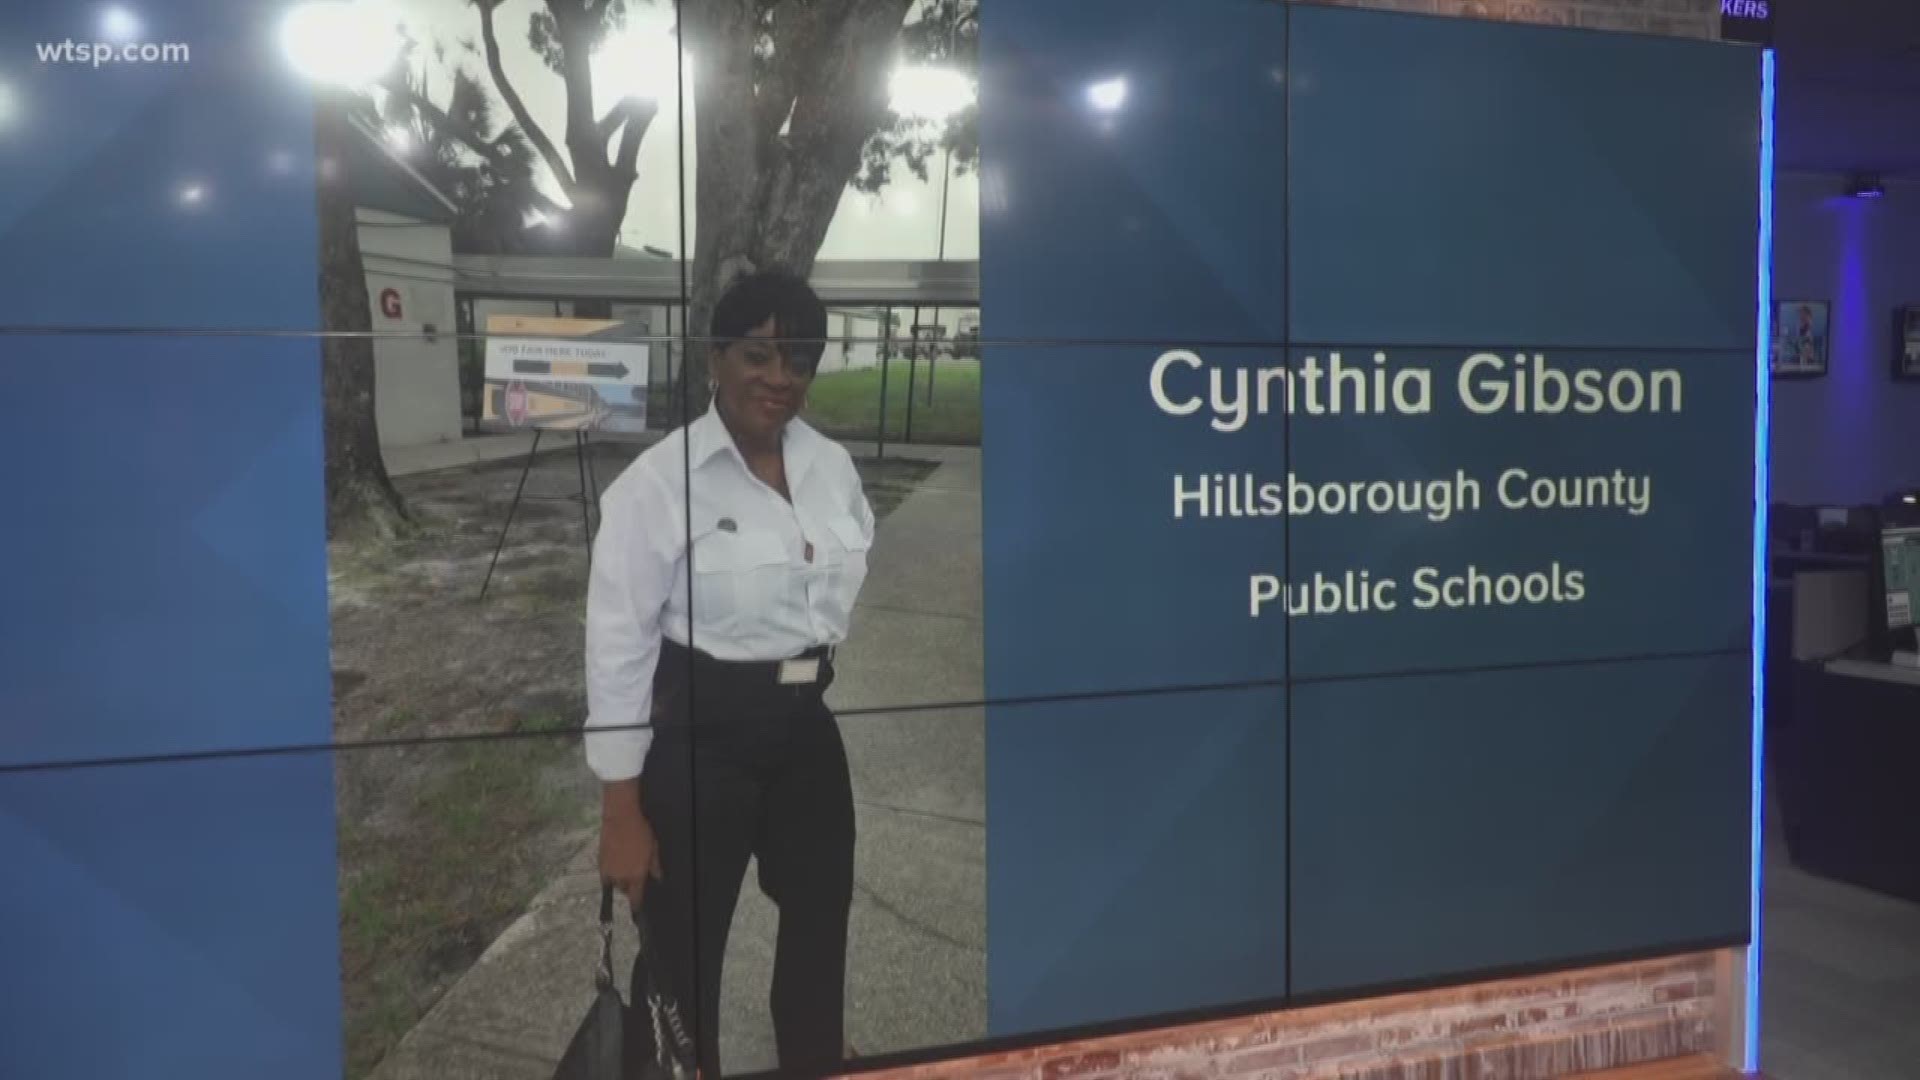 A longtime bus driver for Hillsborough County schools died in a crash on her way to work on the first day of the school year.

Cynthia Gibson, also known as Ms. Cherry, was in her car when she was killed in the crash on Interstate 4, district spokeswoman Tanya Arja said. https://on.wtsp.com/2OQU7b6